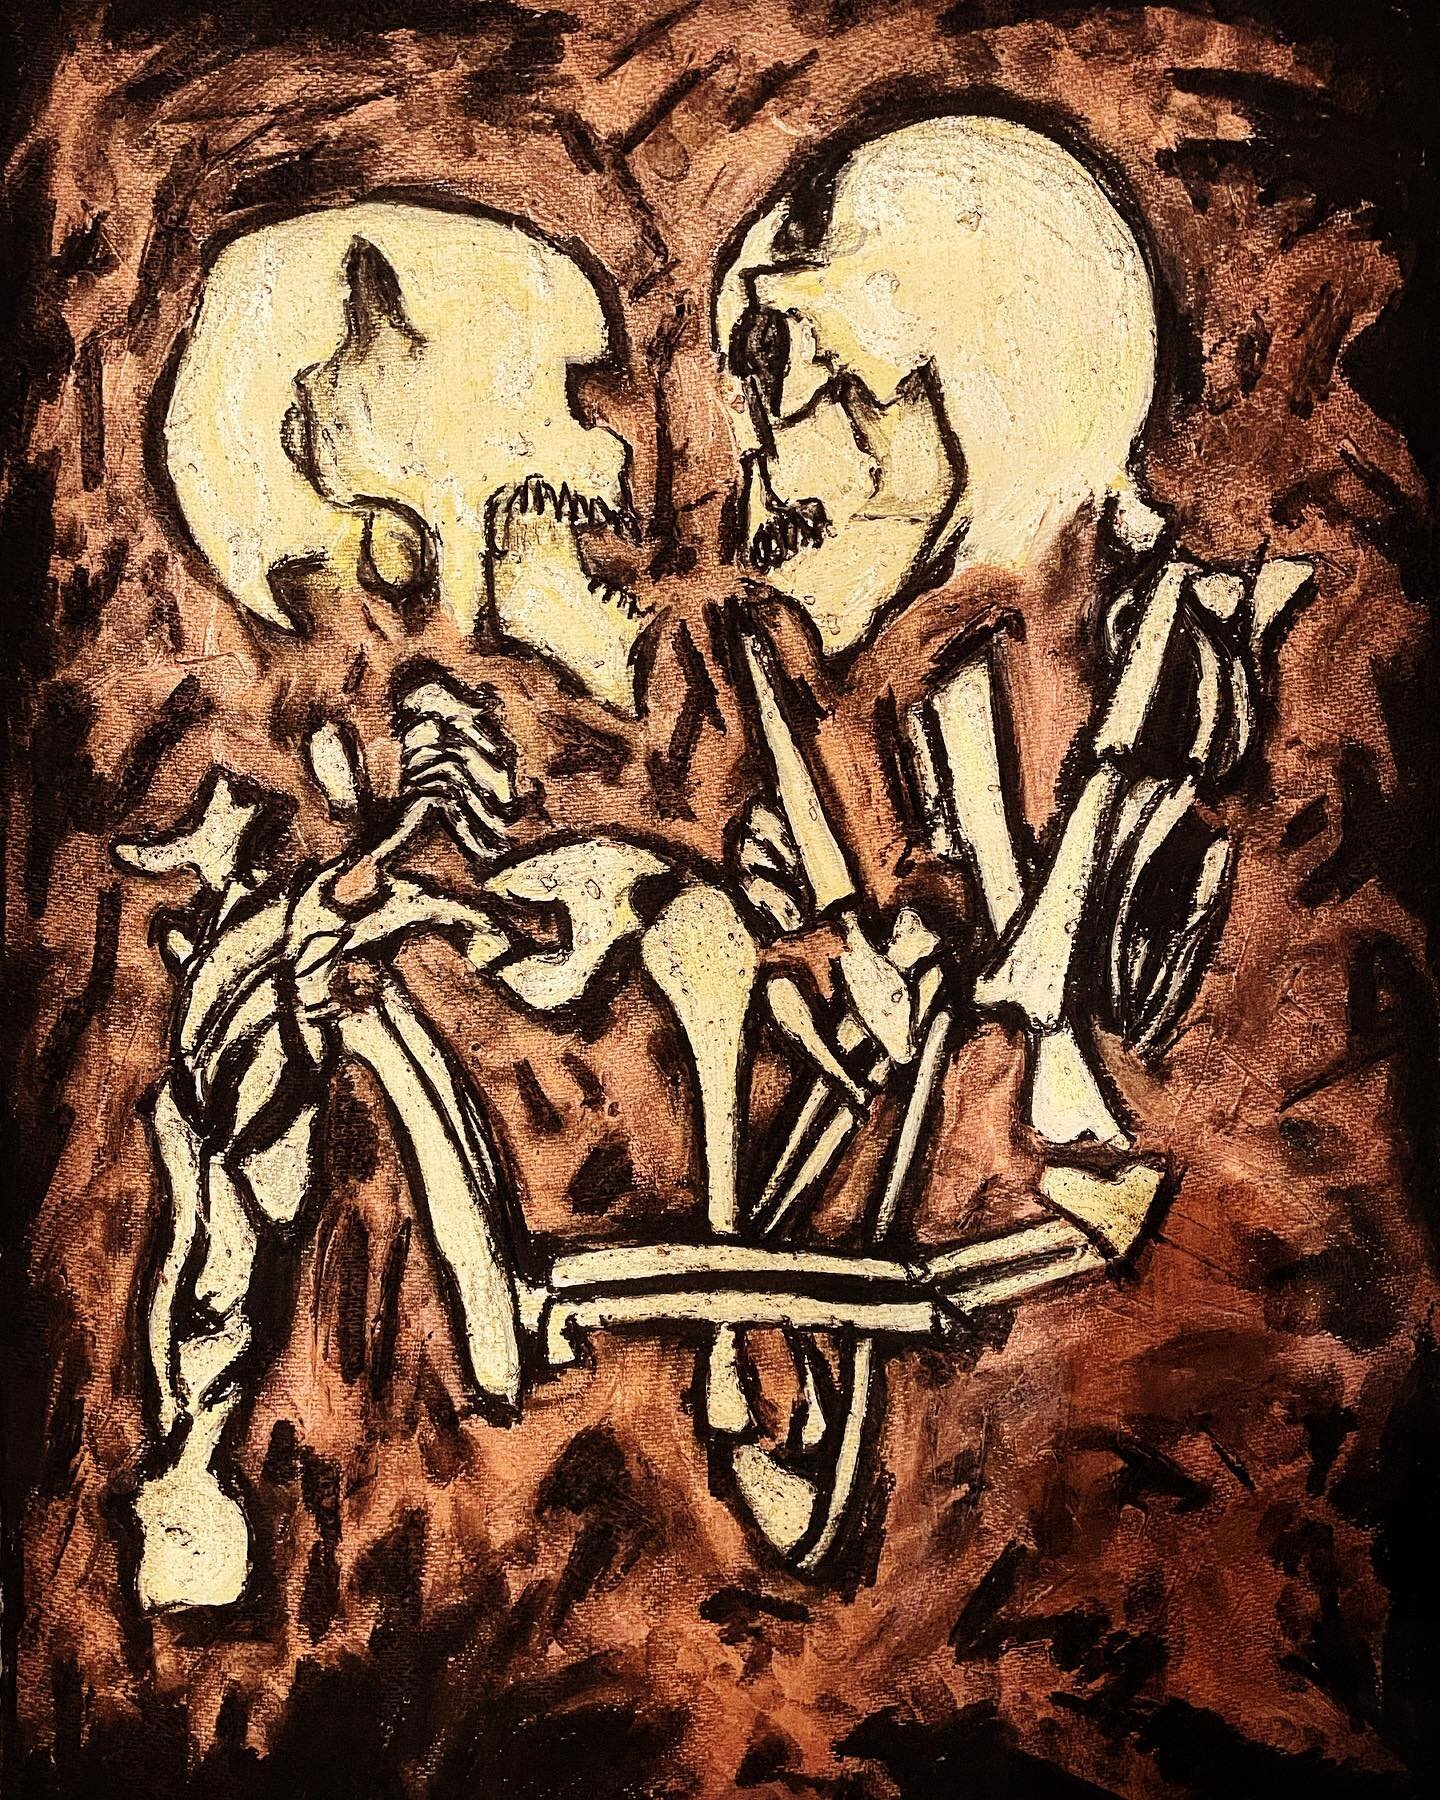 The Lovers of Valdaro. Drawing inspired by a Neolithic grave discovered near Mantua in Italy, the two skeletons buried face to face with their arms around each other. Love endures eternally. #love #lovers #drawing #drawingoftheday #art  #artforsale